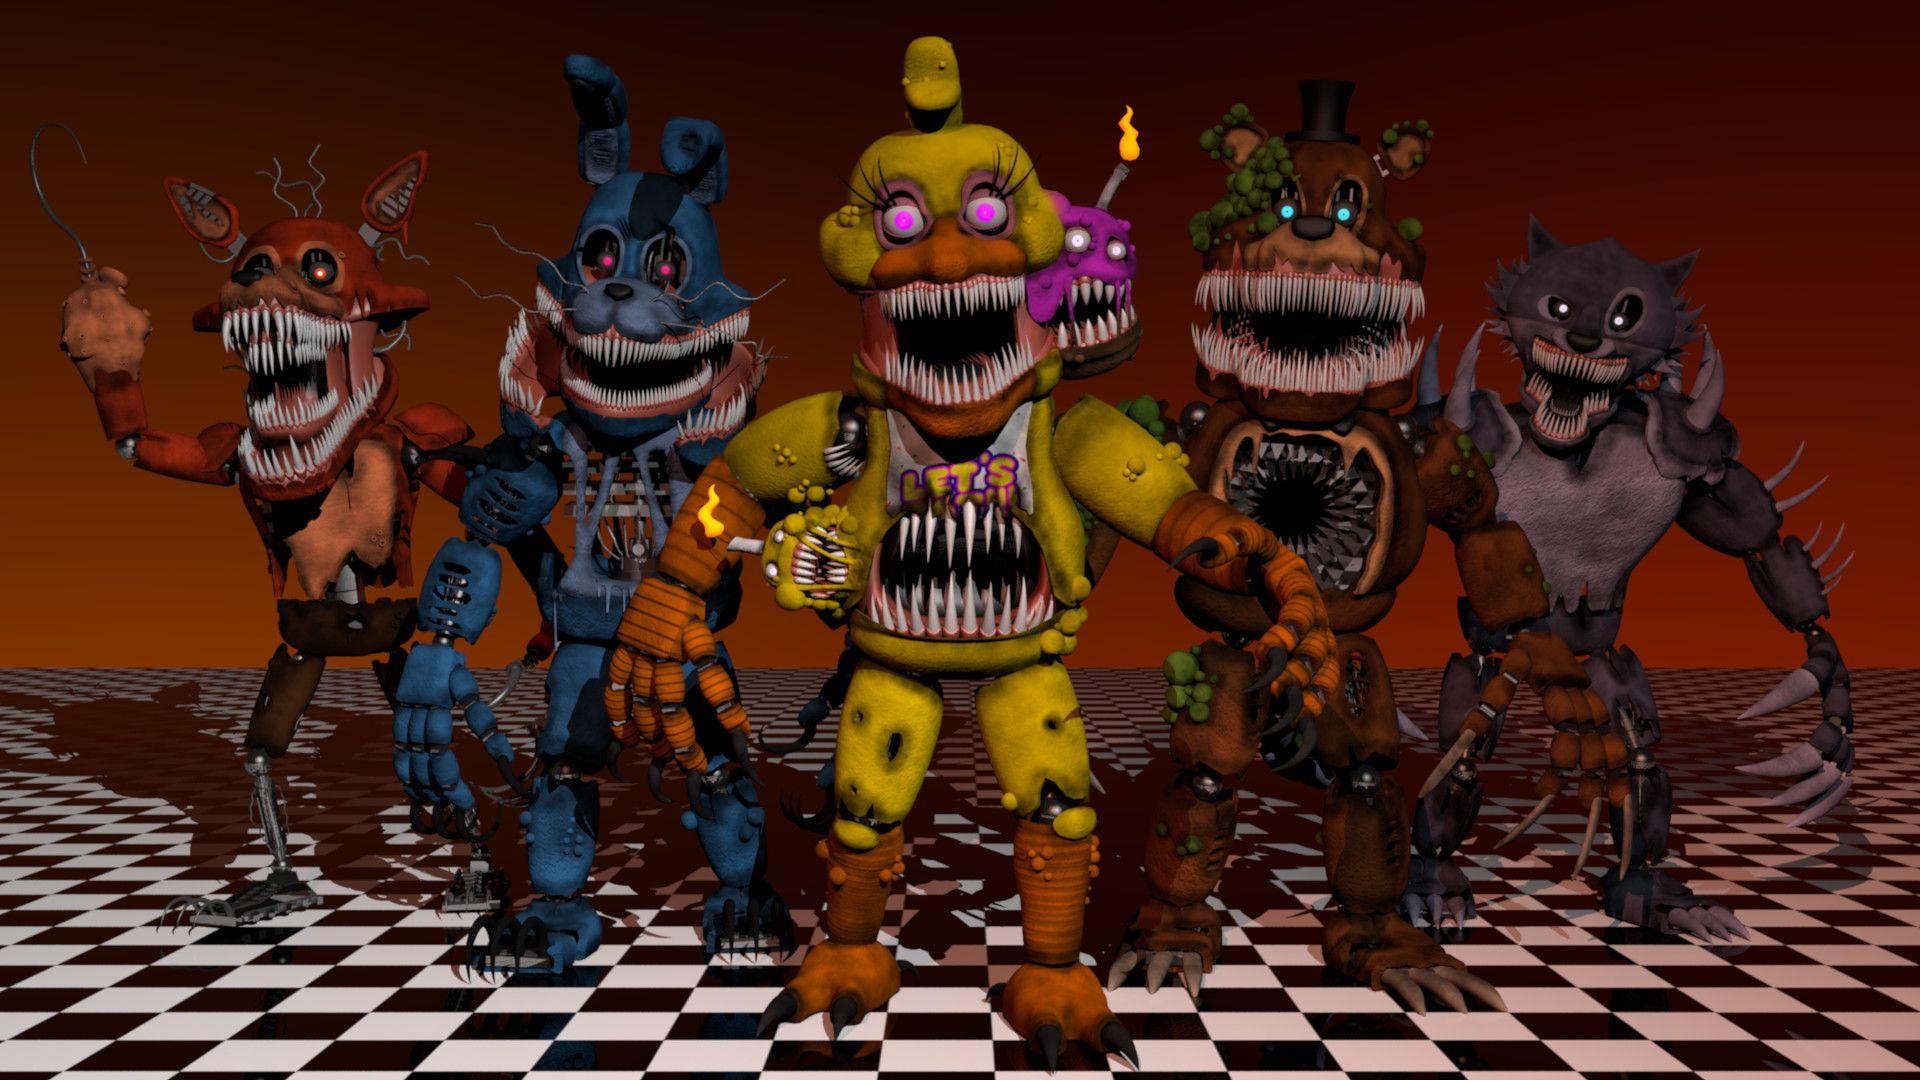 Thomas Honeybell Nights at Freddy's: The Twisted Ones